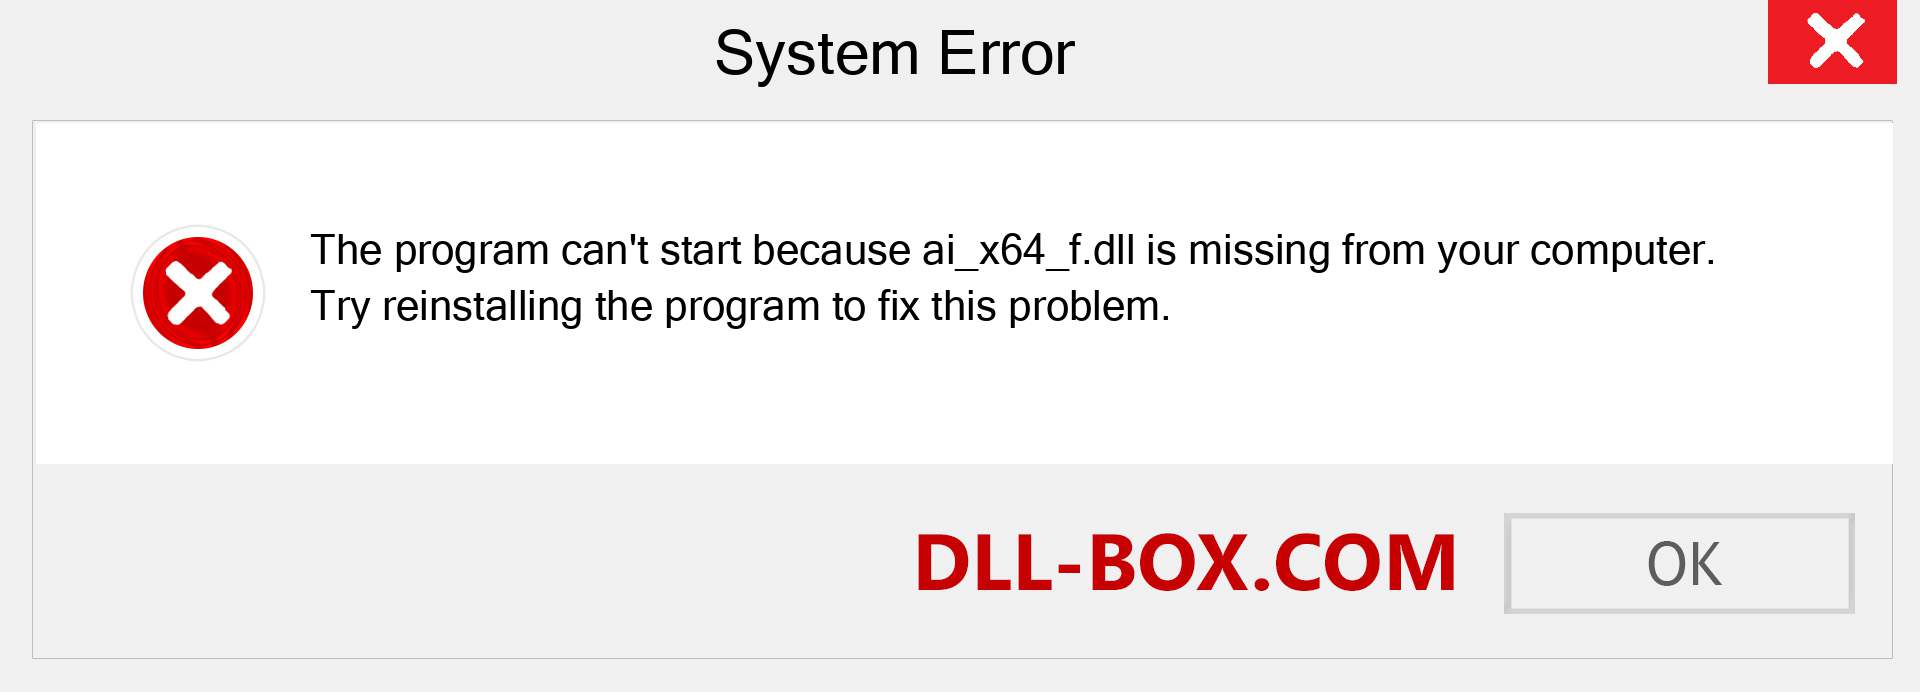  ai_x64_f.dll file is missing?. Download for Windows 7, 8, 10 - Fix  ai_x64_f dll Missing Error on Windows, photos, images